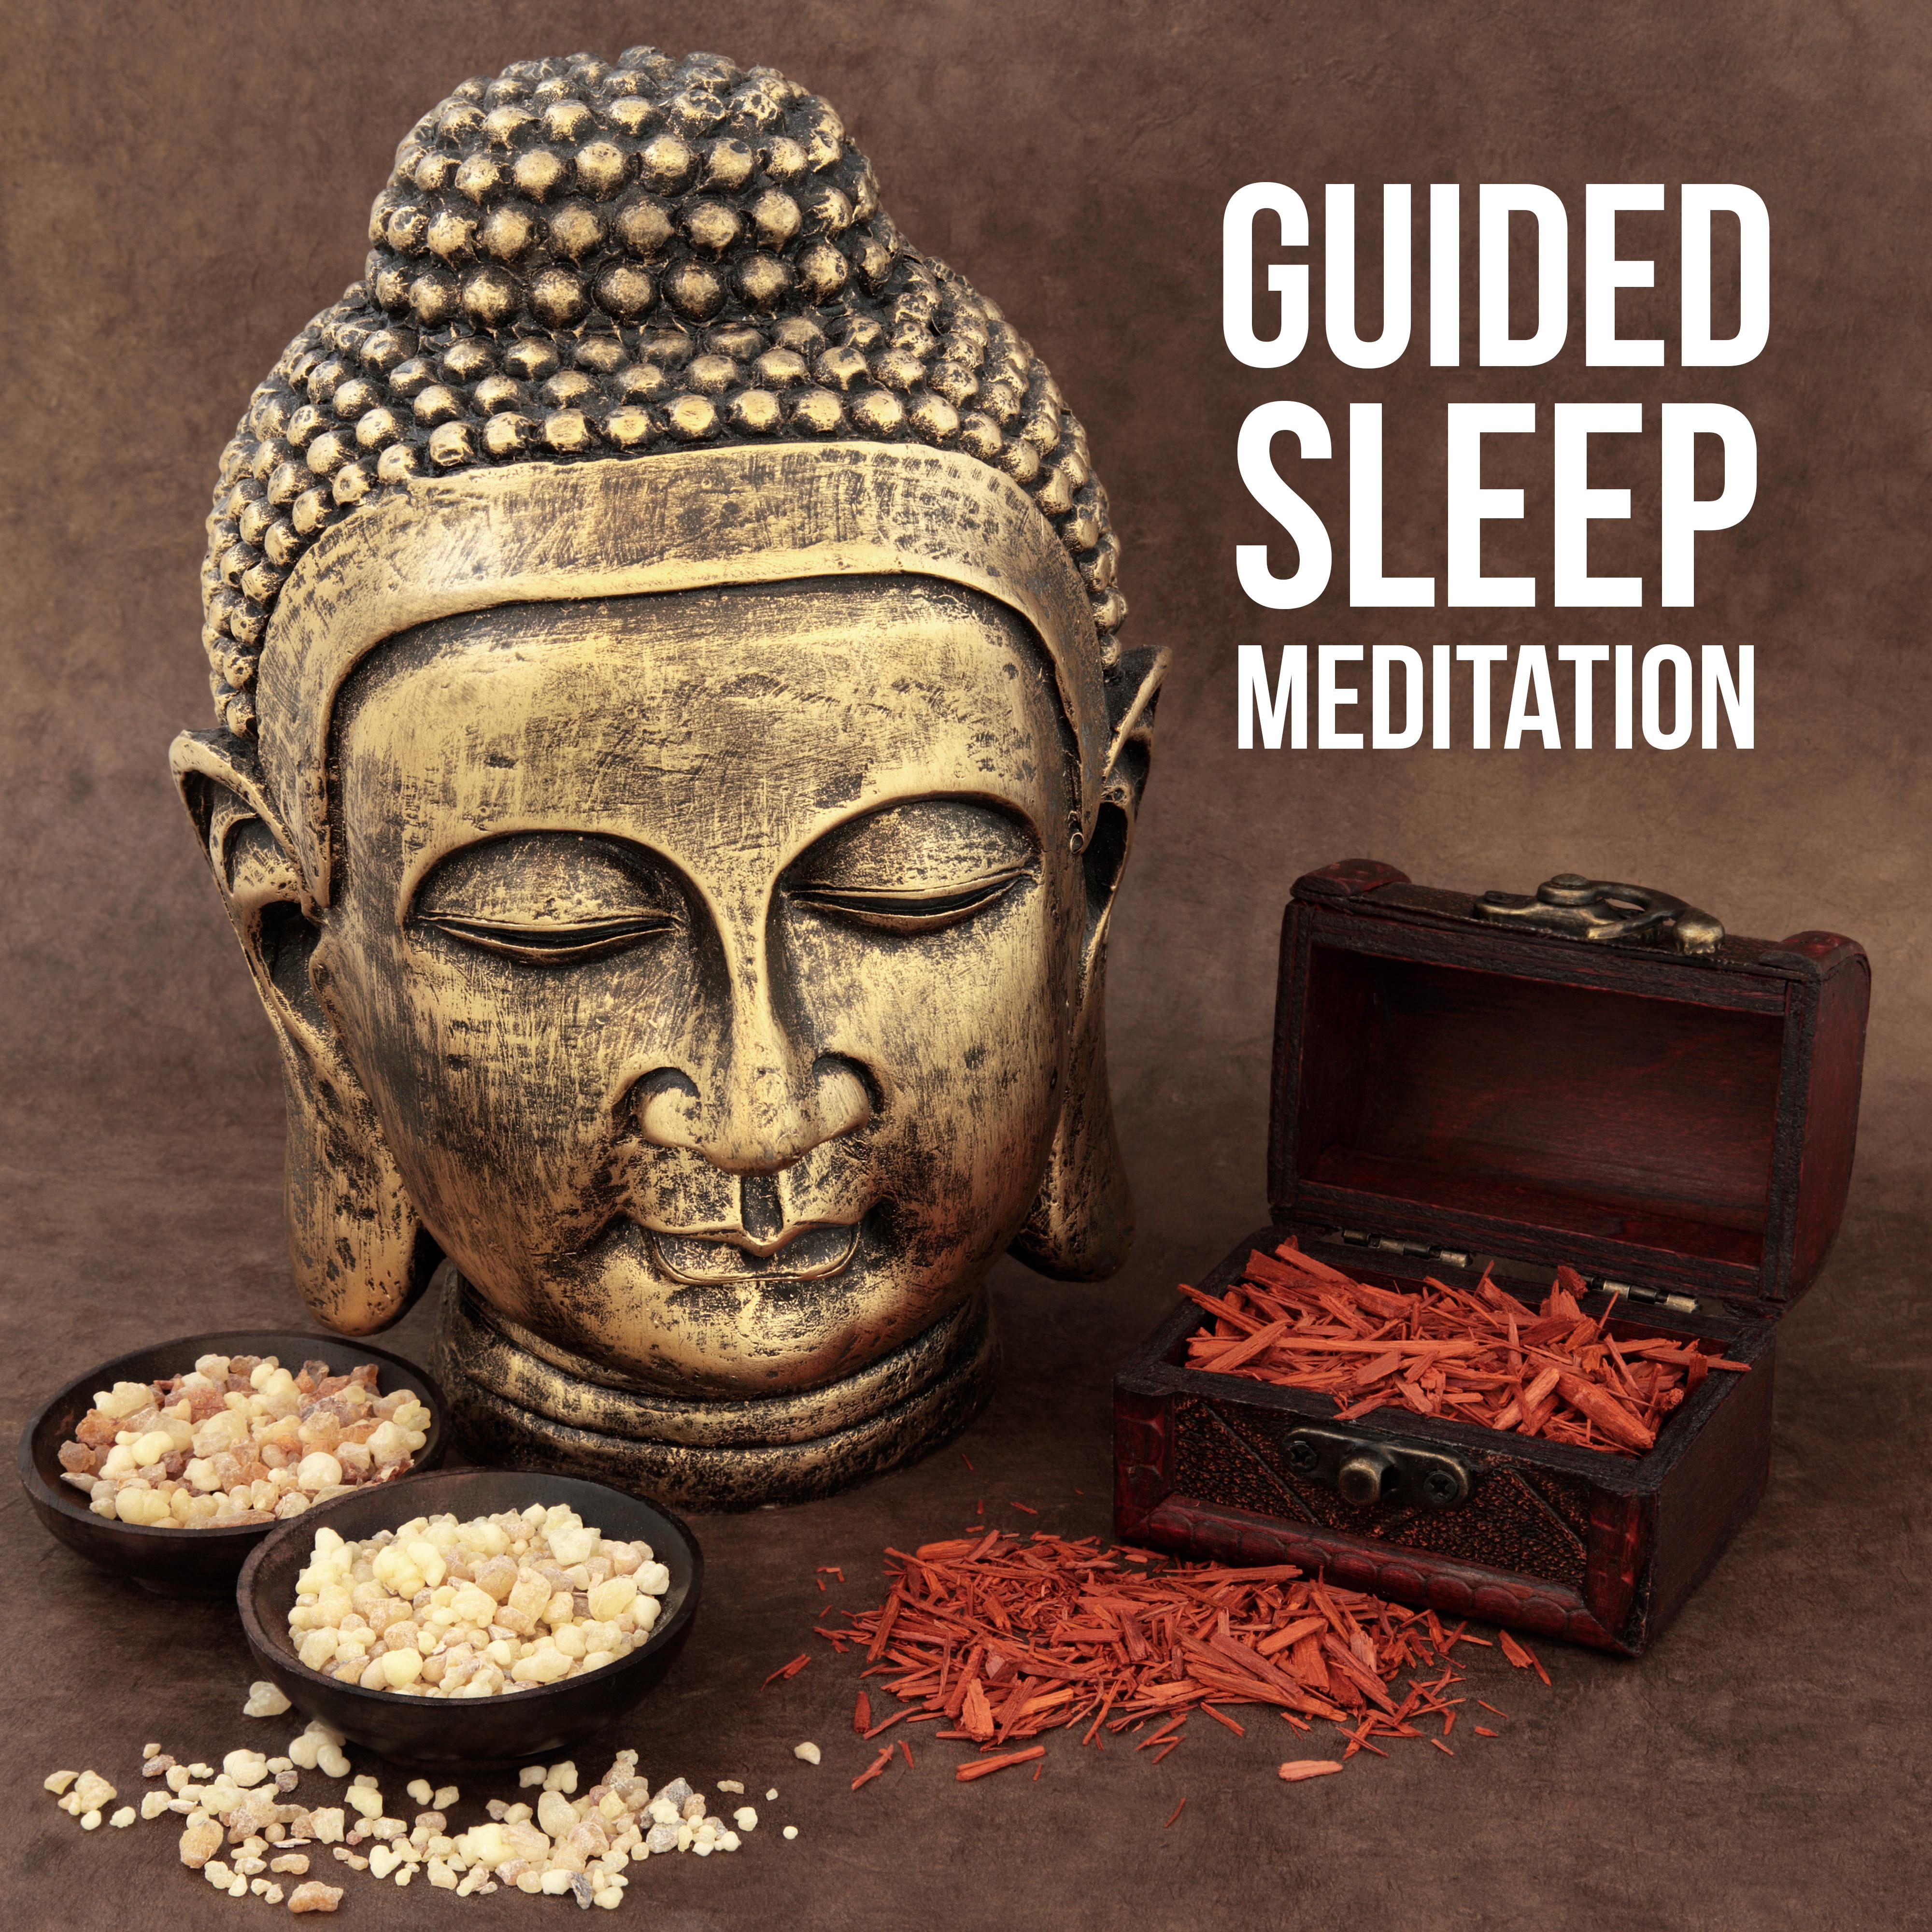 Guided Sleep Meditation - Musical Background for Meditation for a Better Sleep, Release from Tension and Stress and for a Peaceful Night